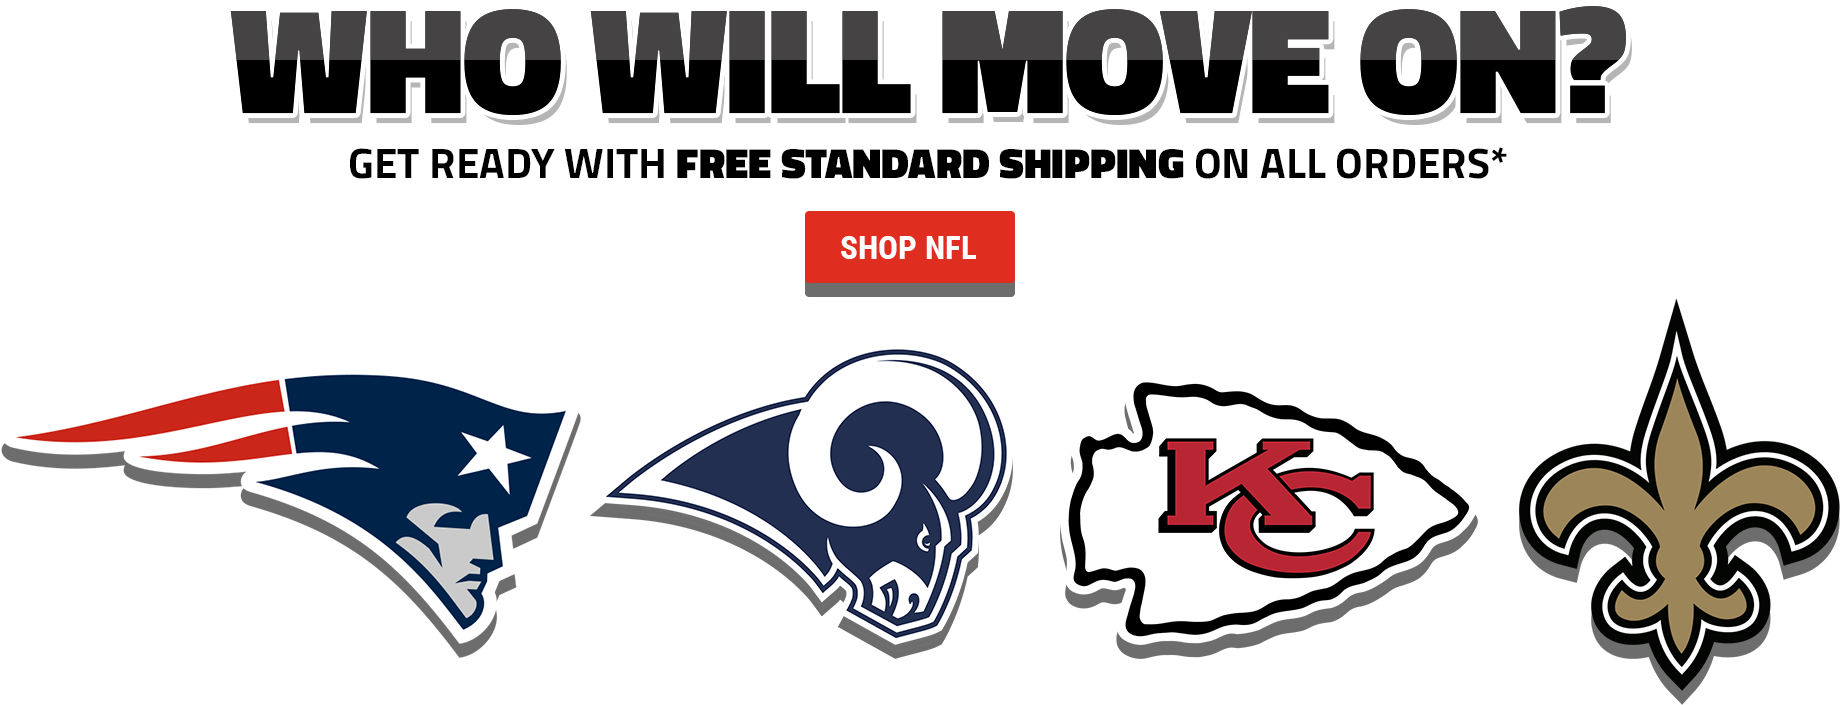 Who Will Move On Get Ready With Free Standard Shipping - Kansas City Chiefs (2000x980), Png Download